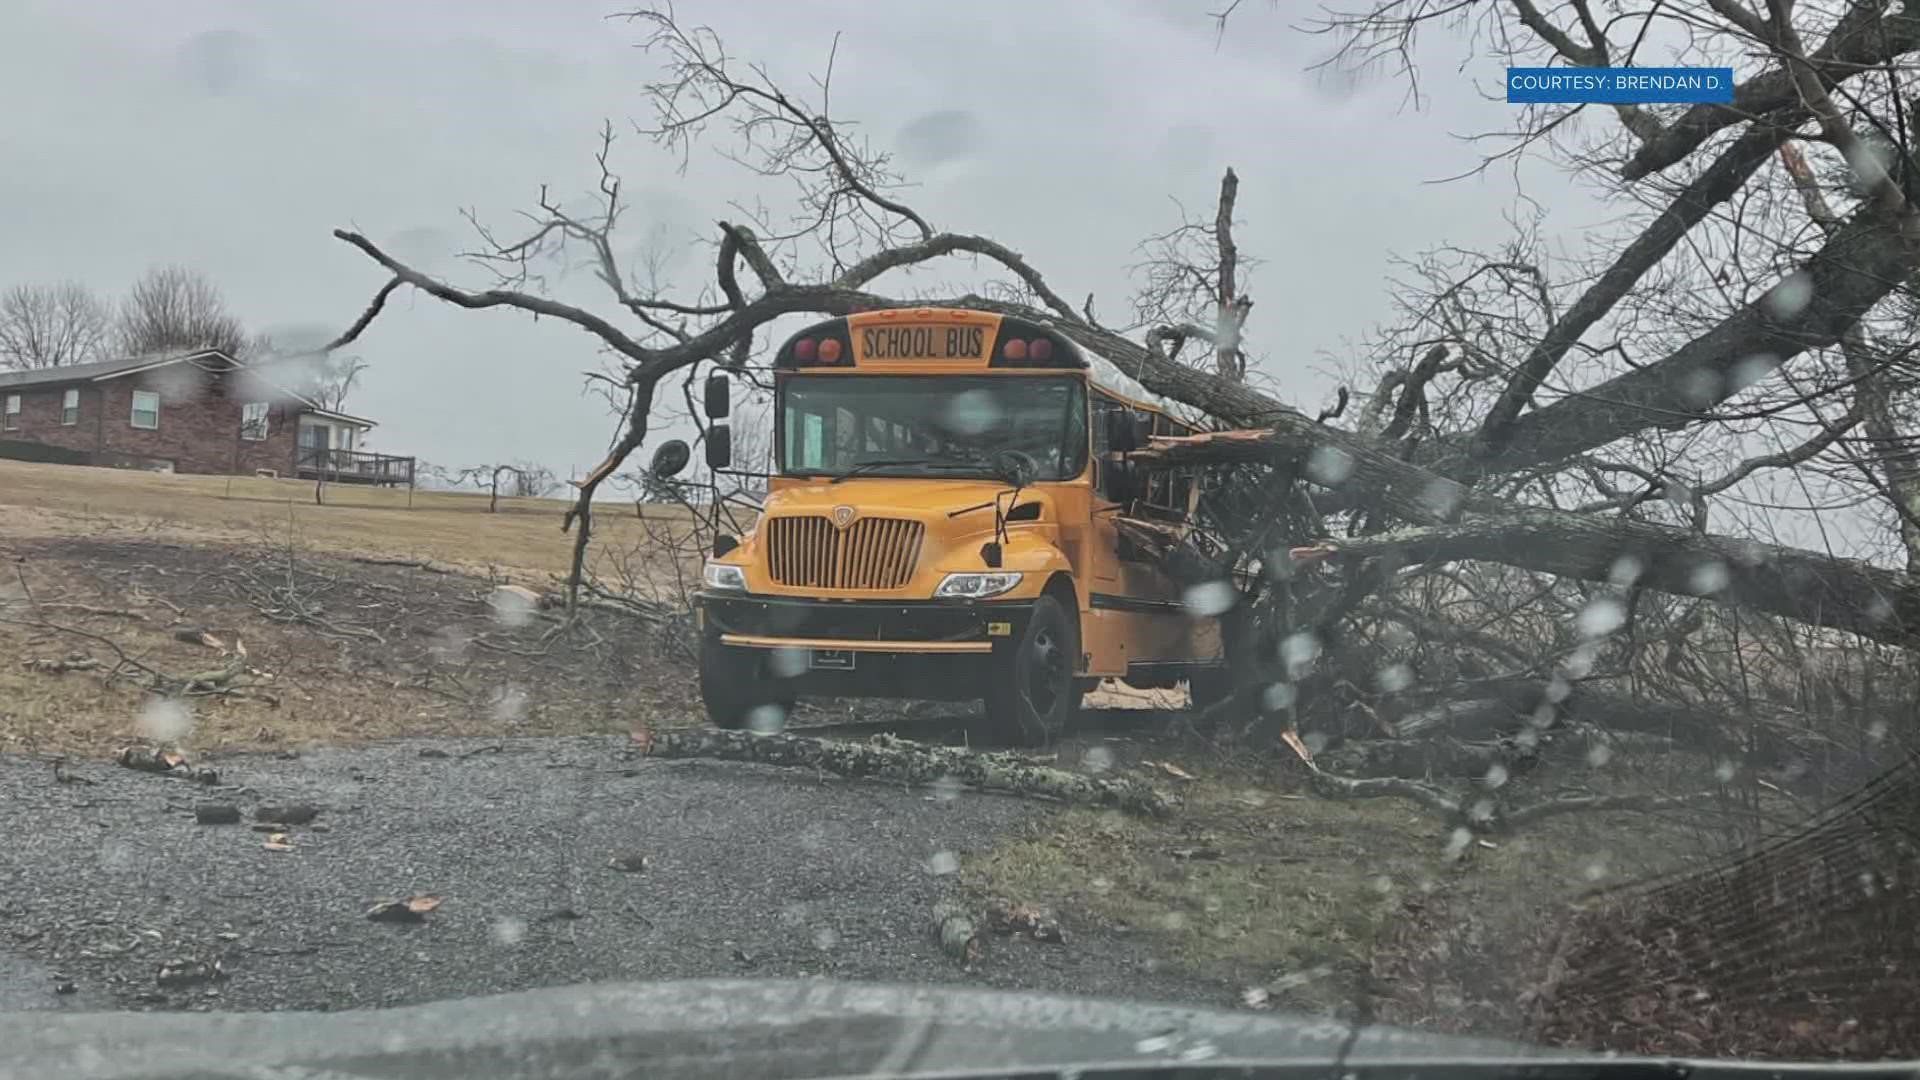 The school district said a tree fell and damaged an empty bus. It happened near New Center Elementary, where the bus was parked.